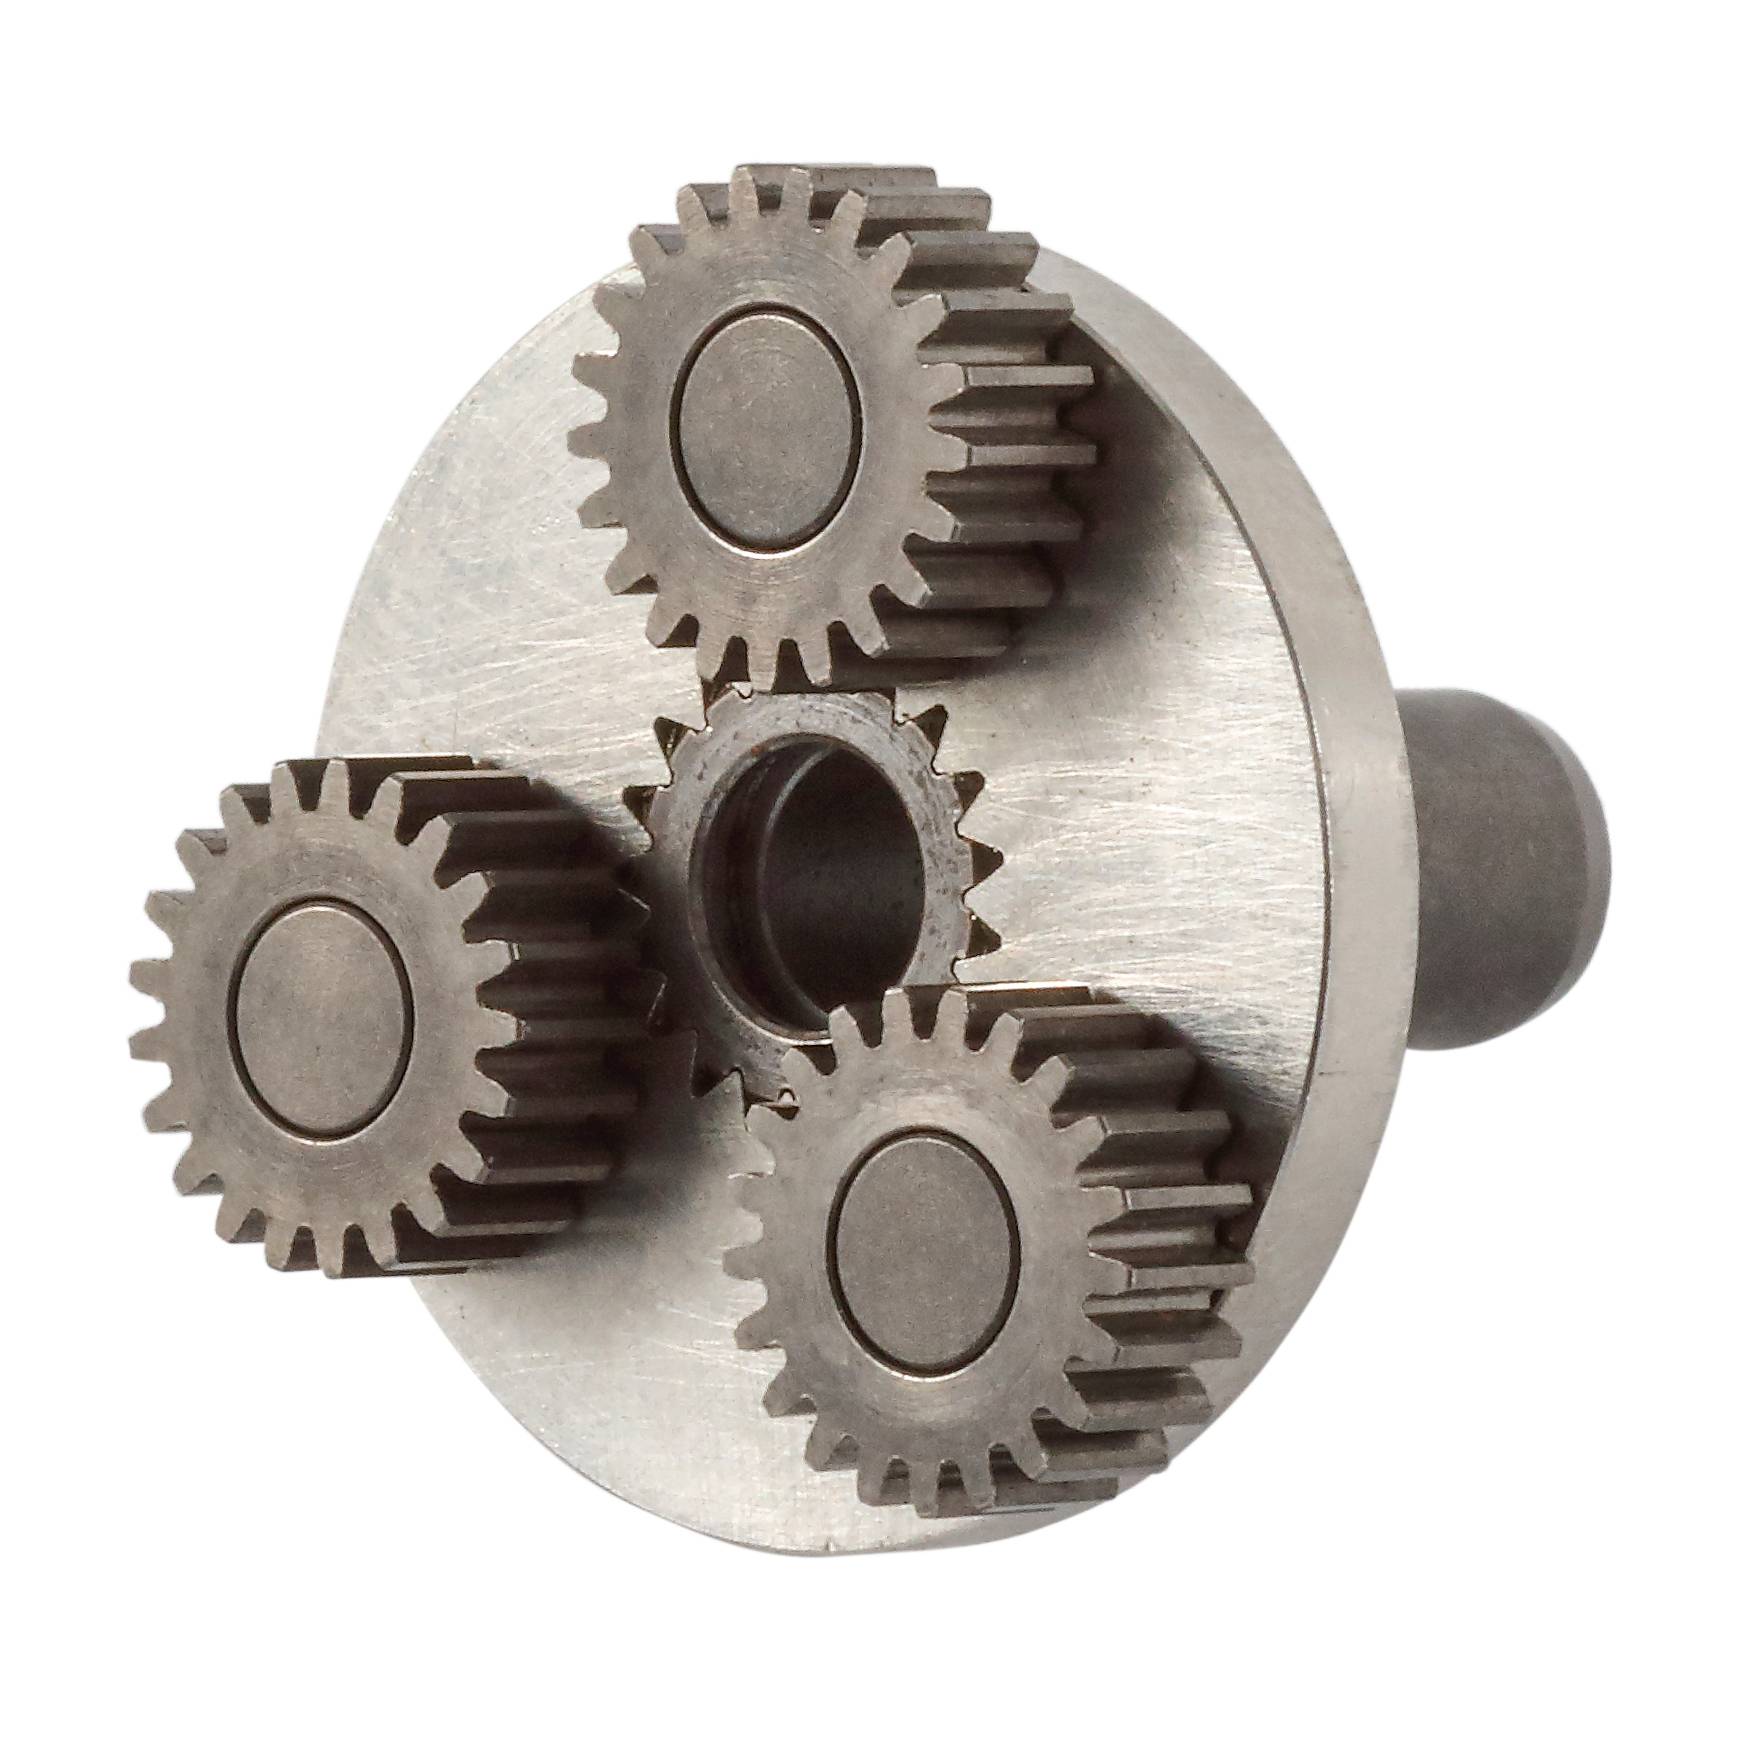 Gear Assembly for Planet or Spur Gearbox